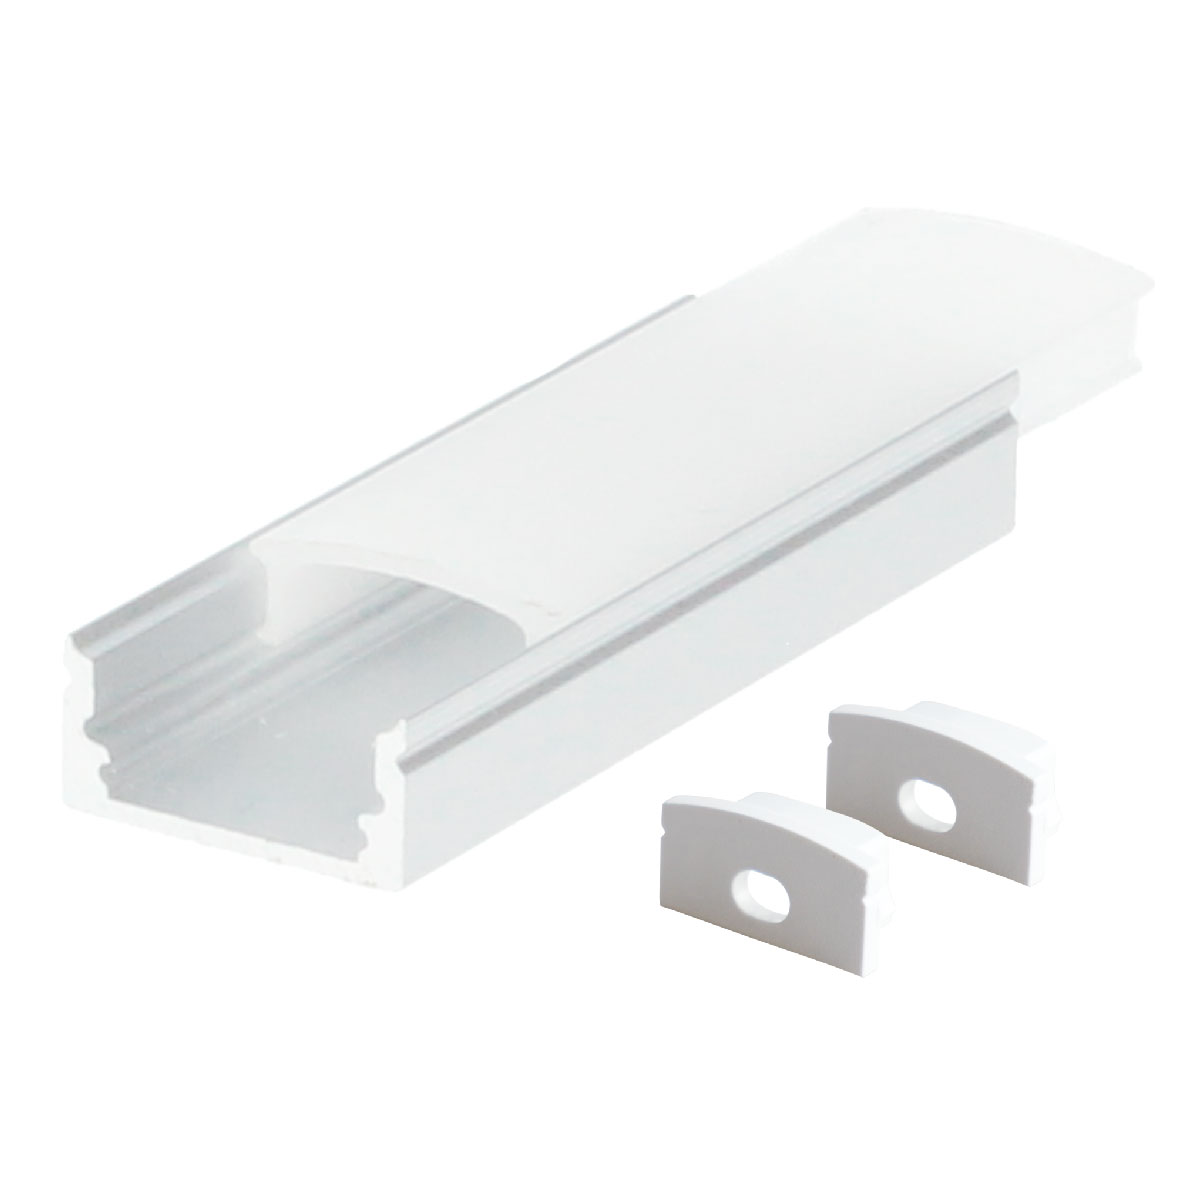 Kit 2M surface aluminum profile for LED strips up to 12mm White